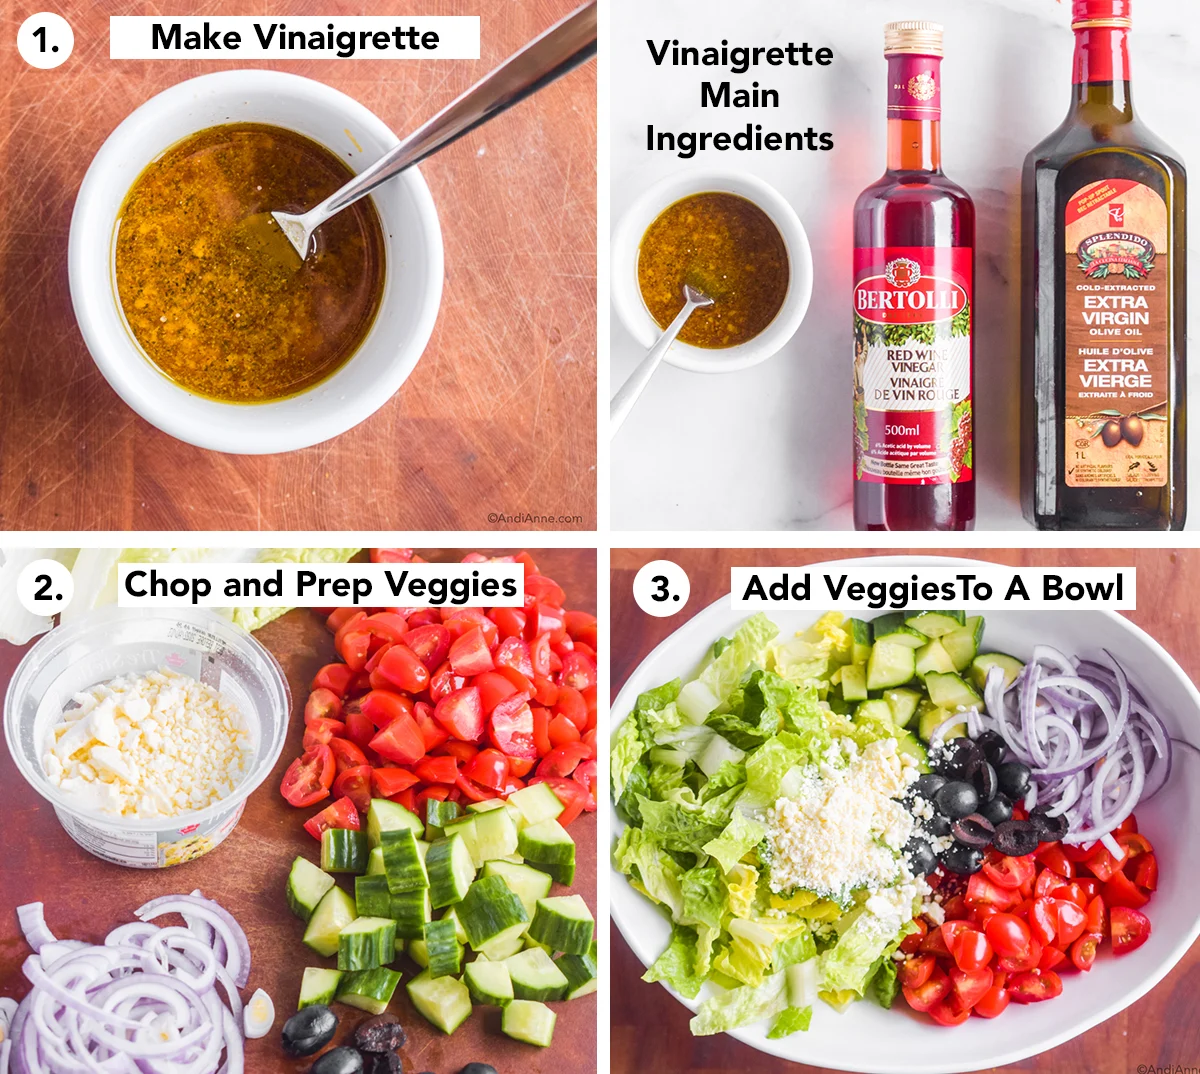 Four images: first a white bowl of vinaigrette dressing with fork, second a bowl of vinaigrette with fork with jar of red wine vinegar and olive oil beside it. Third includes chopped tomatoes, chopped cucumber, sliced red onion, and container of feta cheese. Four is an oval bowl with chopped lettuce, cucumber, tomatoes, sliced red onion and feta cheese.